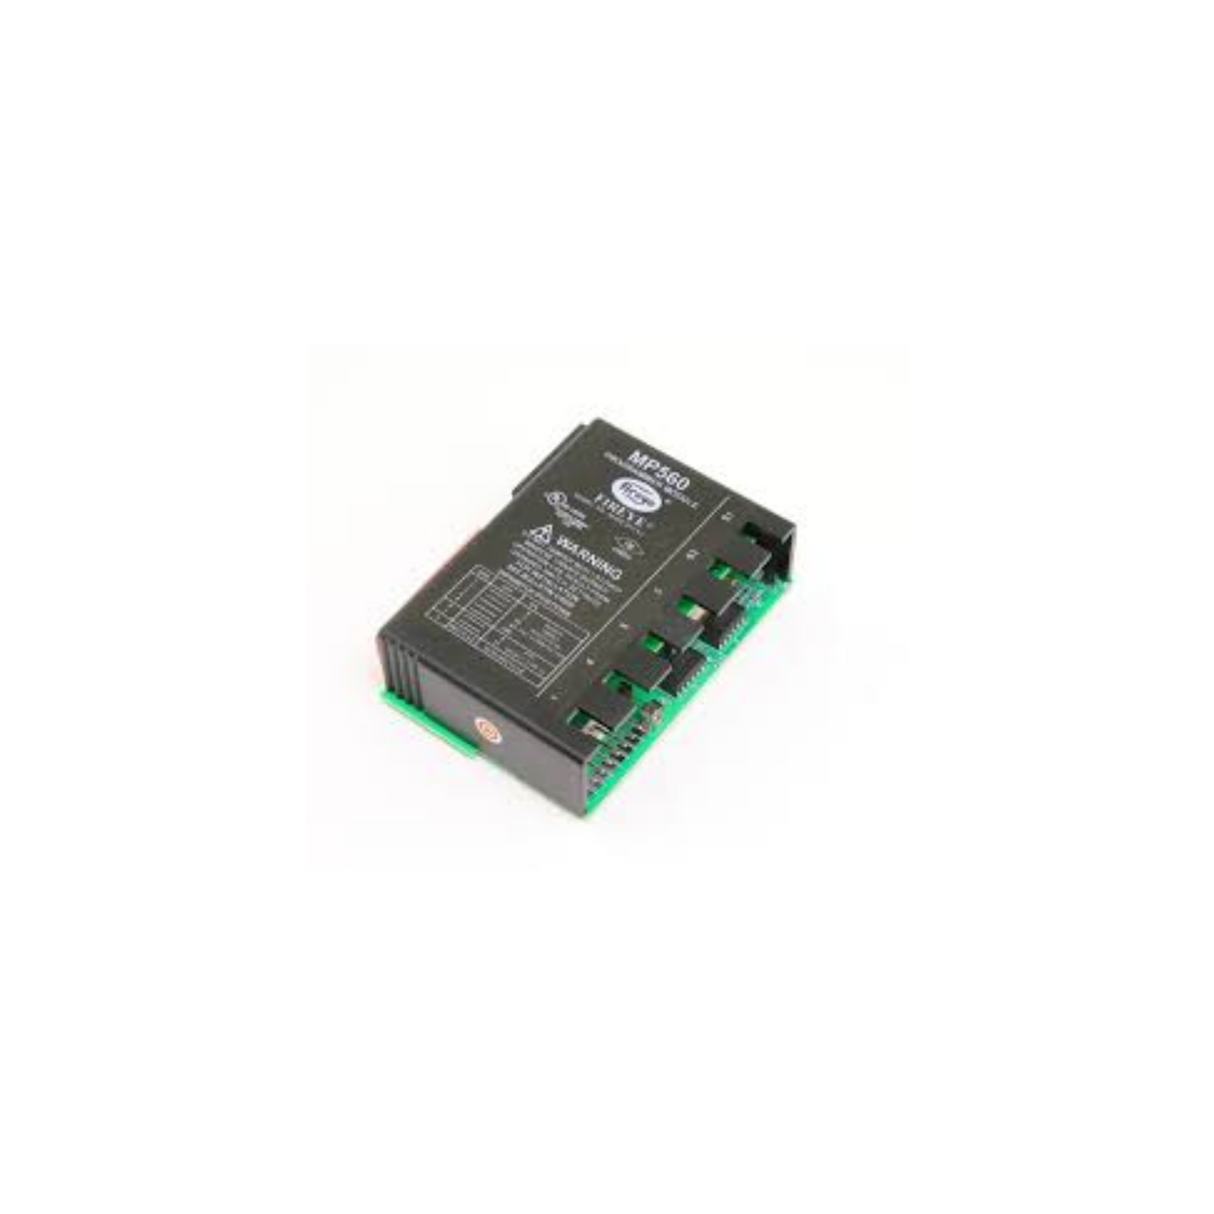 Fireye MP560 Programmer Module, Selectable Recycle/Non-Recycle, Pilot Cutoff/Stabilization